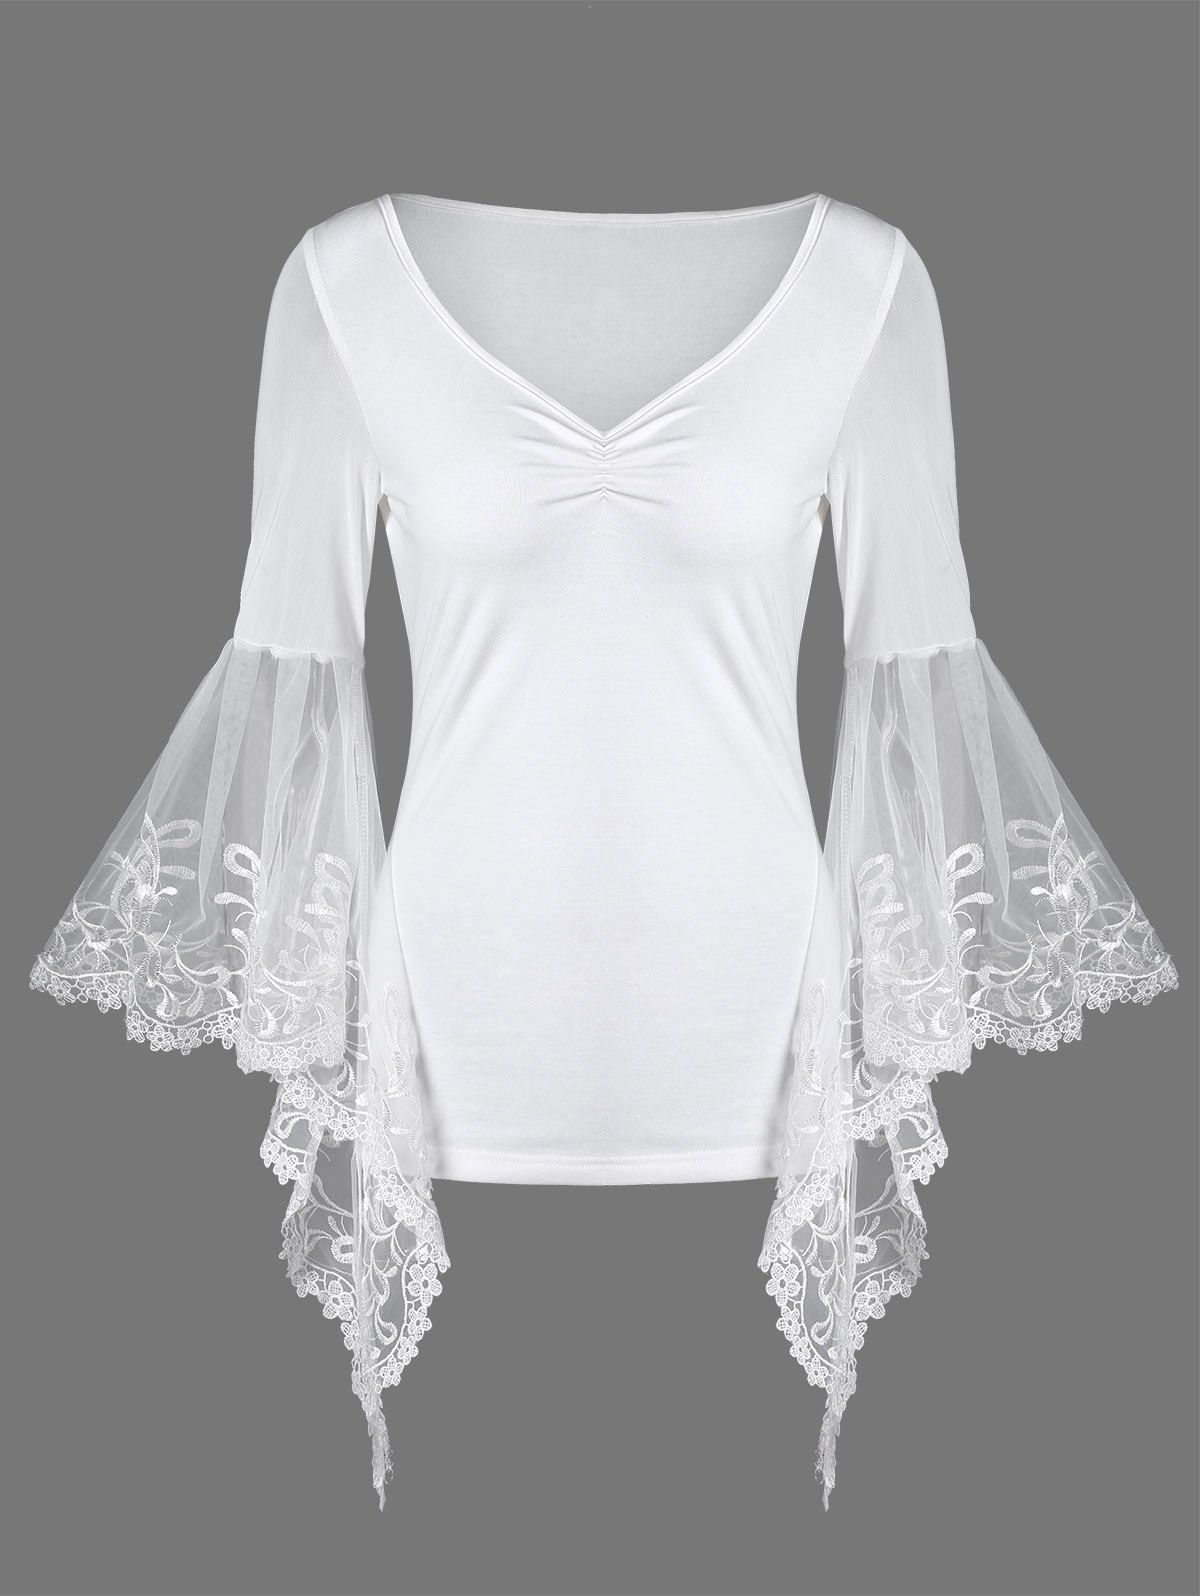 [41% OFF] 2021 Bell Sleeve Lace Panel Plus Size T-Shirt In WHITE ...